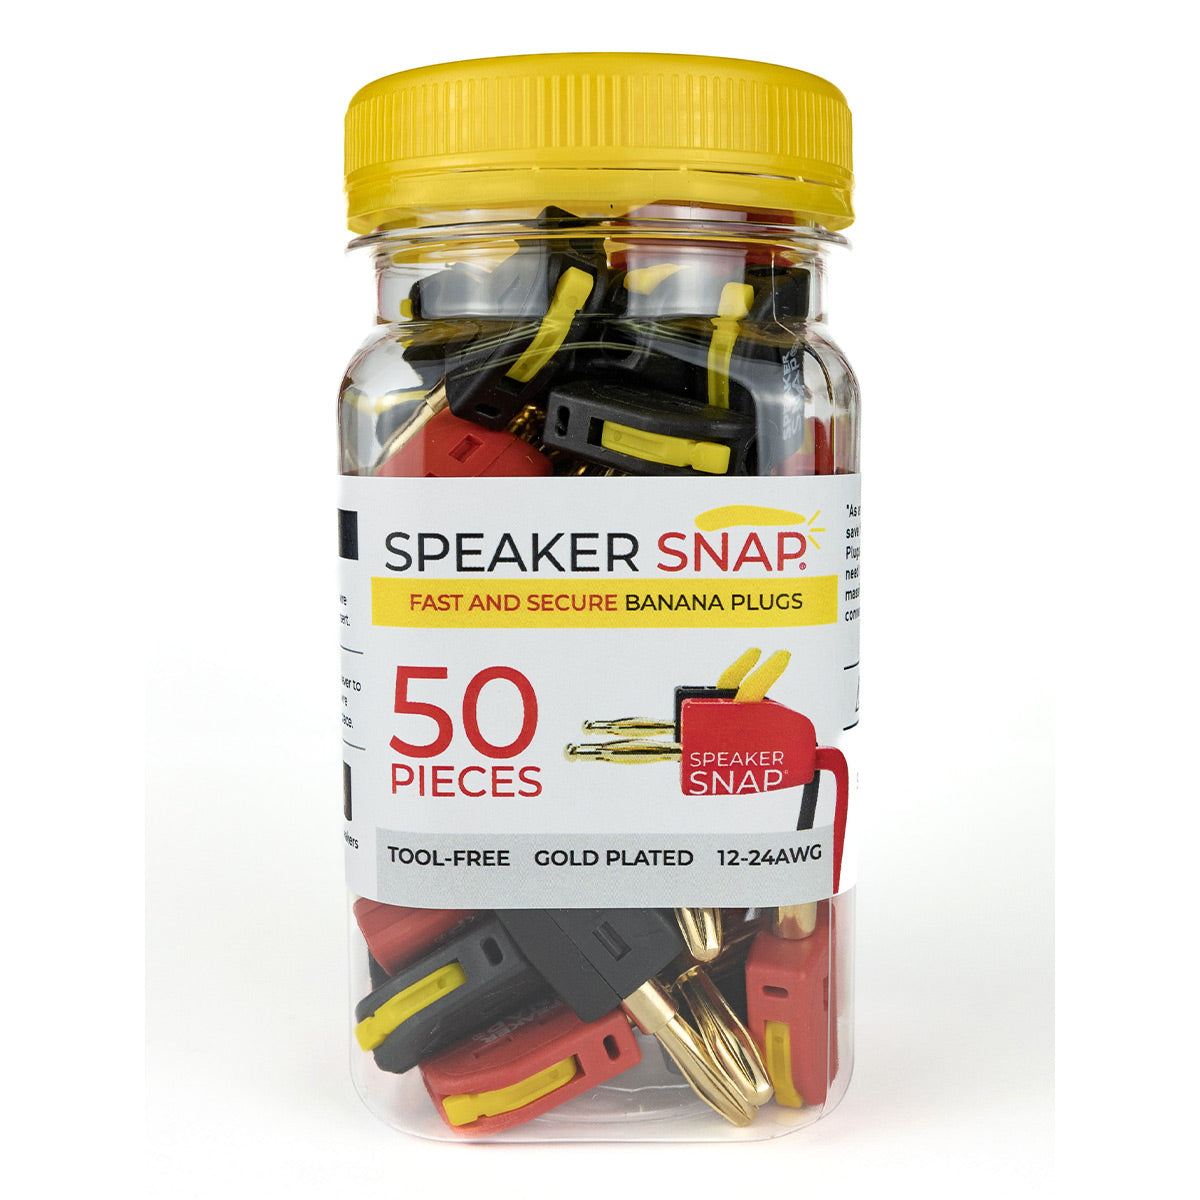 Speaker Snap 50 Count of Fast & Secure Banana Plugs, Gold Plated, 12-24 AWG, for Home Theaters, Speaker Wire, Wall Plates, and Receivers